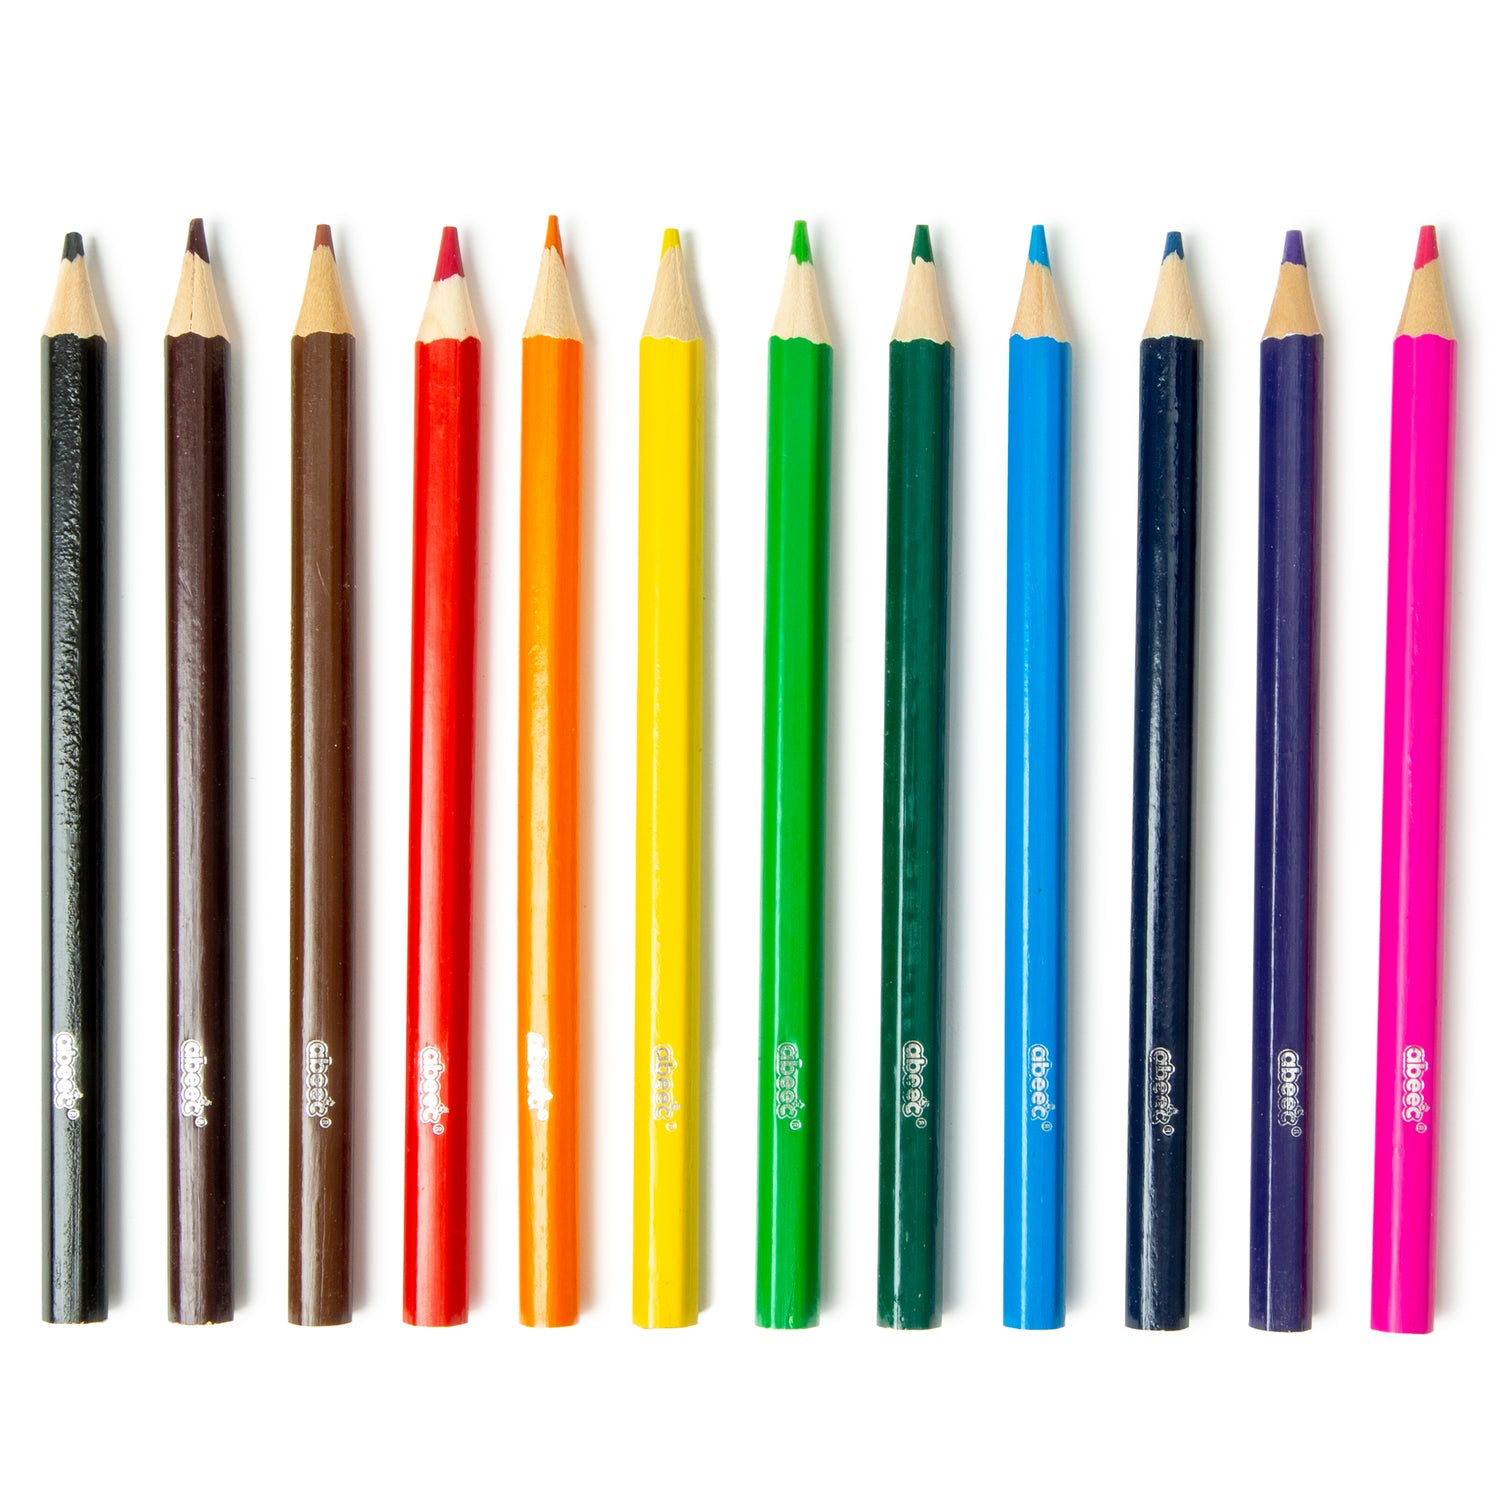 Colour, Drawing, & Painting | Crayons, Paint, & Pens | aBeeC® toys ...